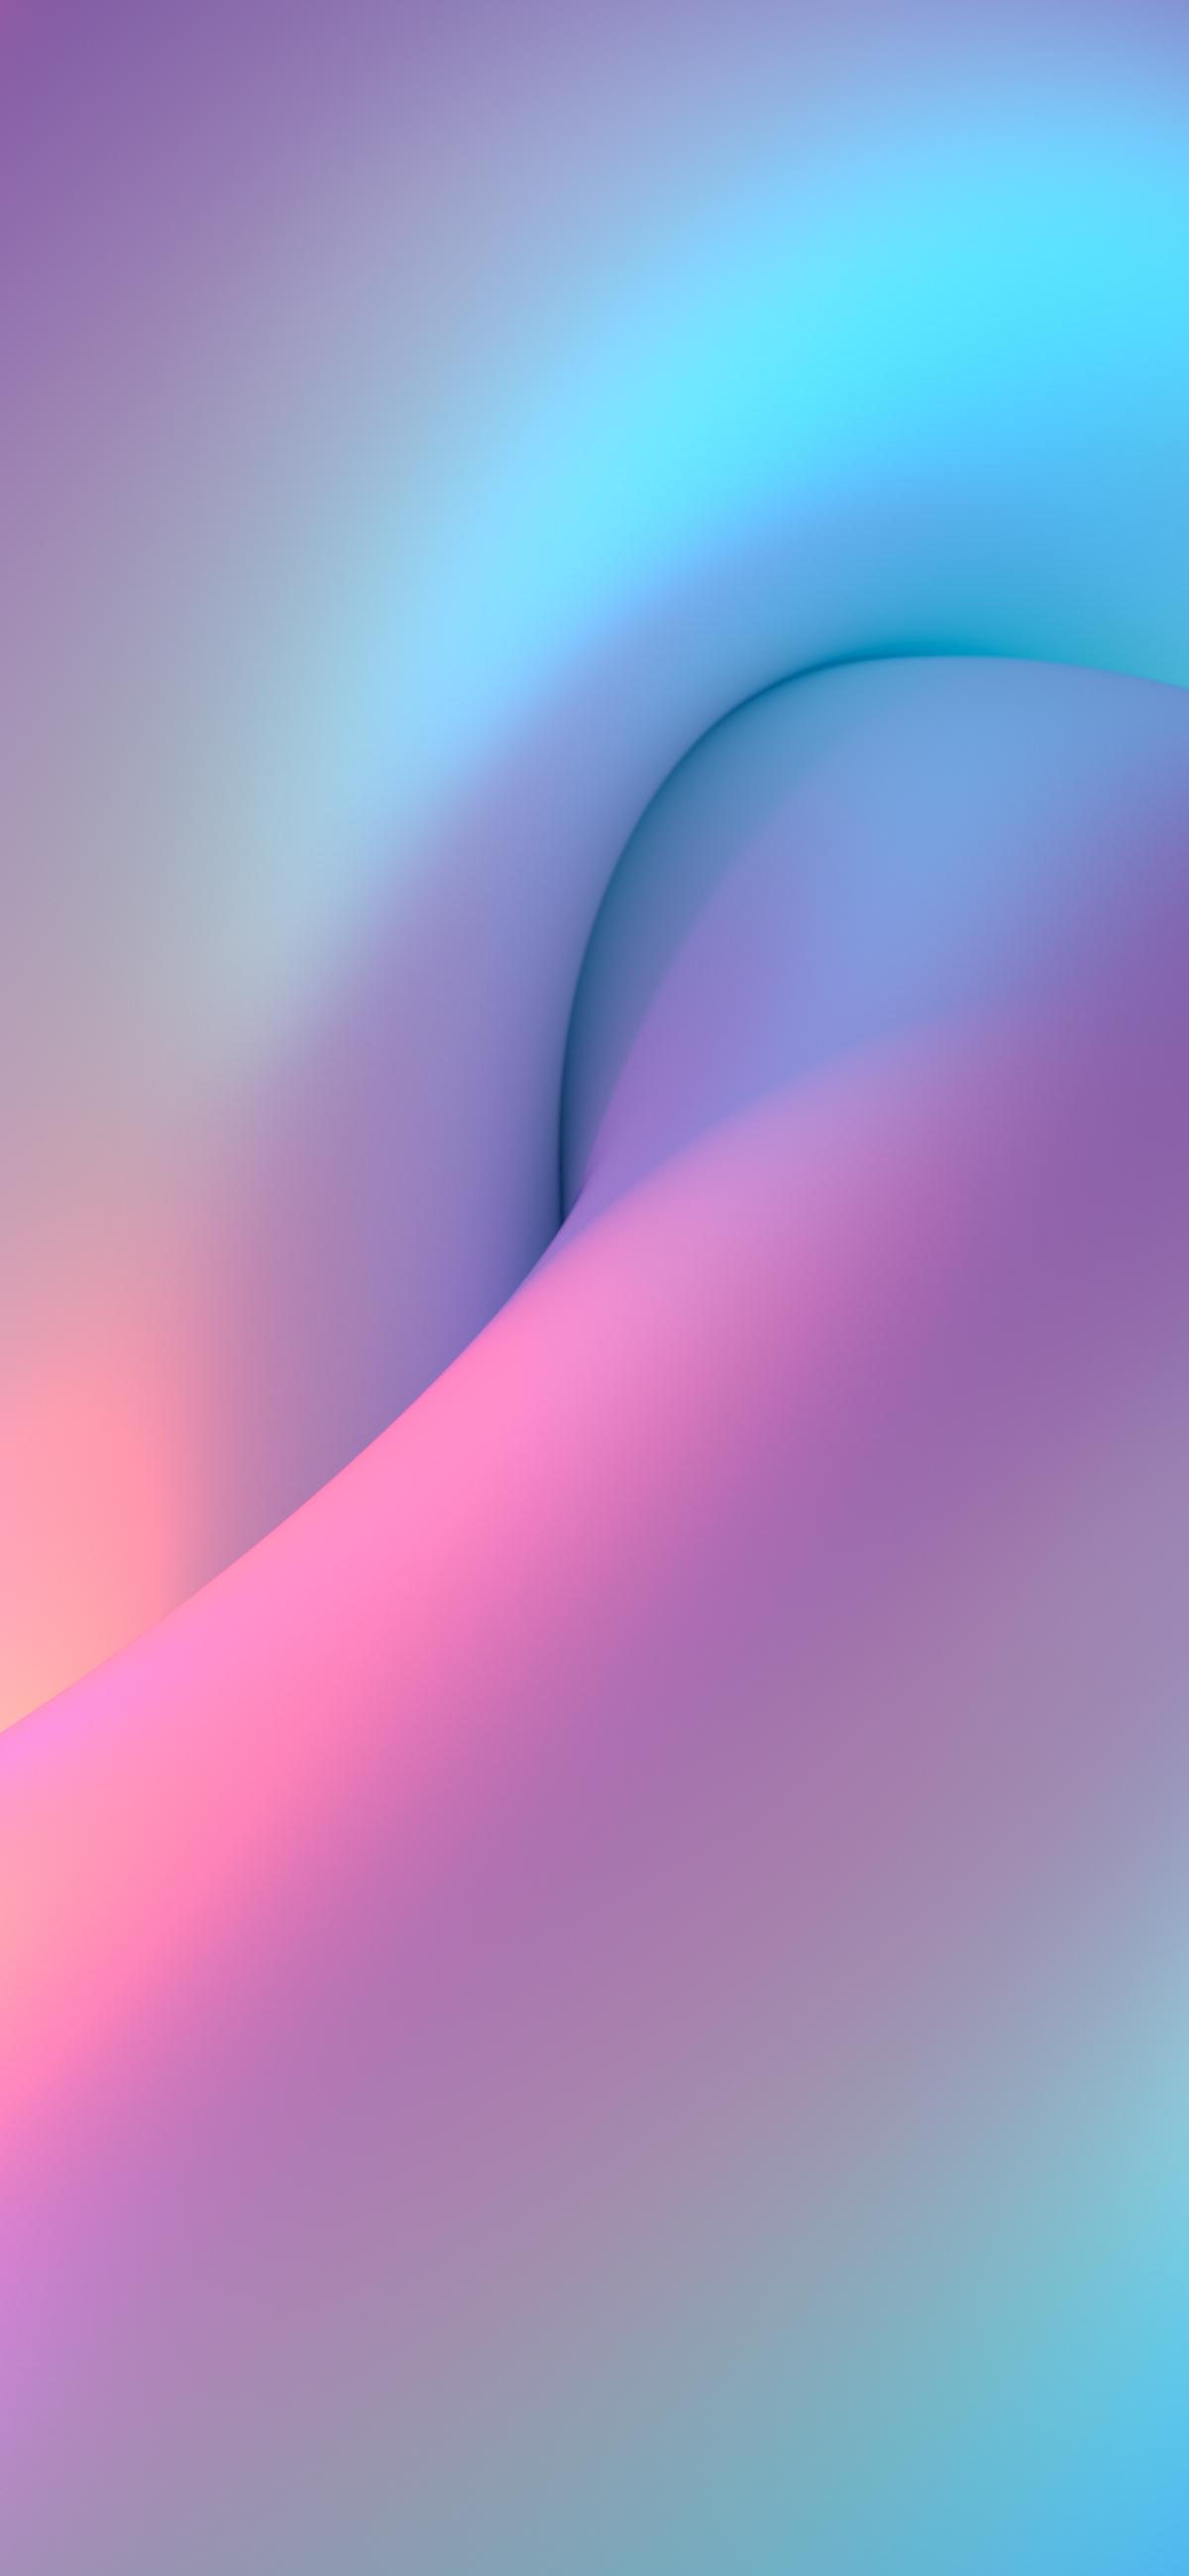 Abstract iPhone wallpaper created by Facebook's design team